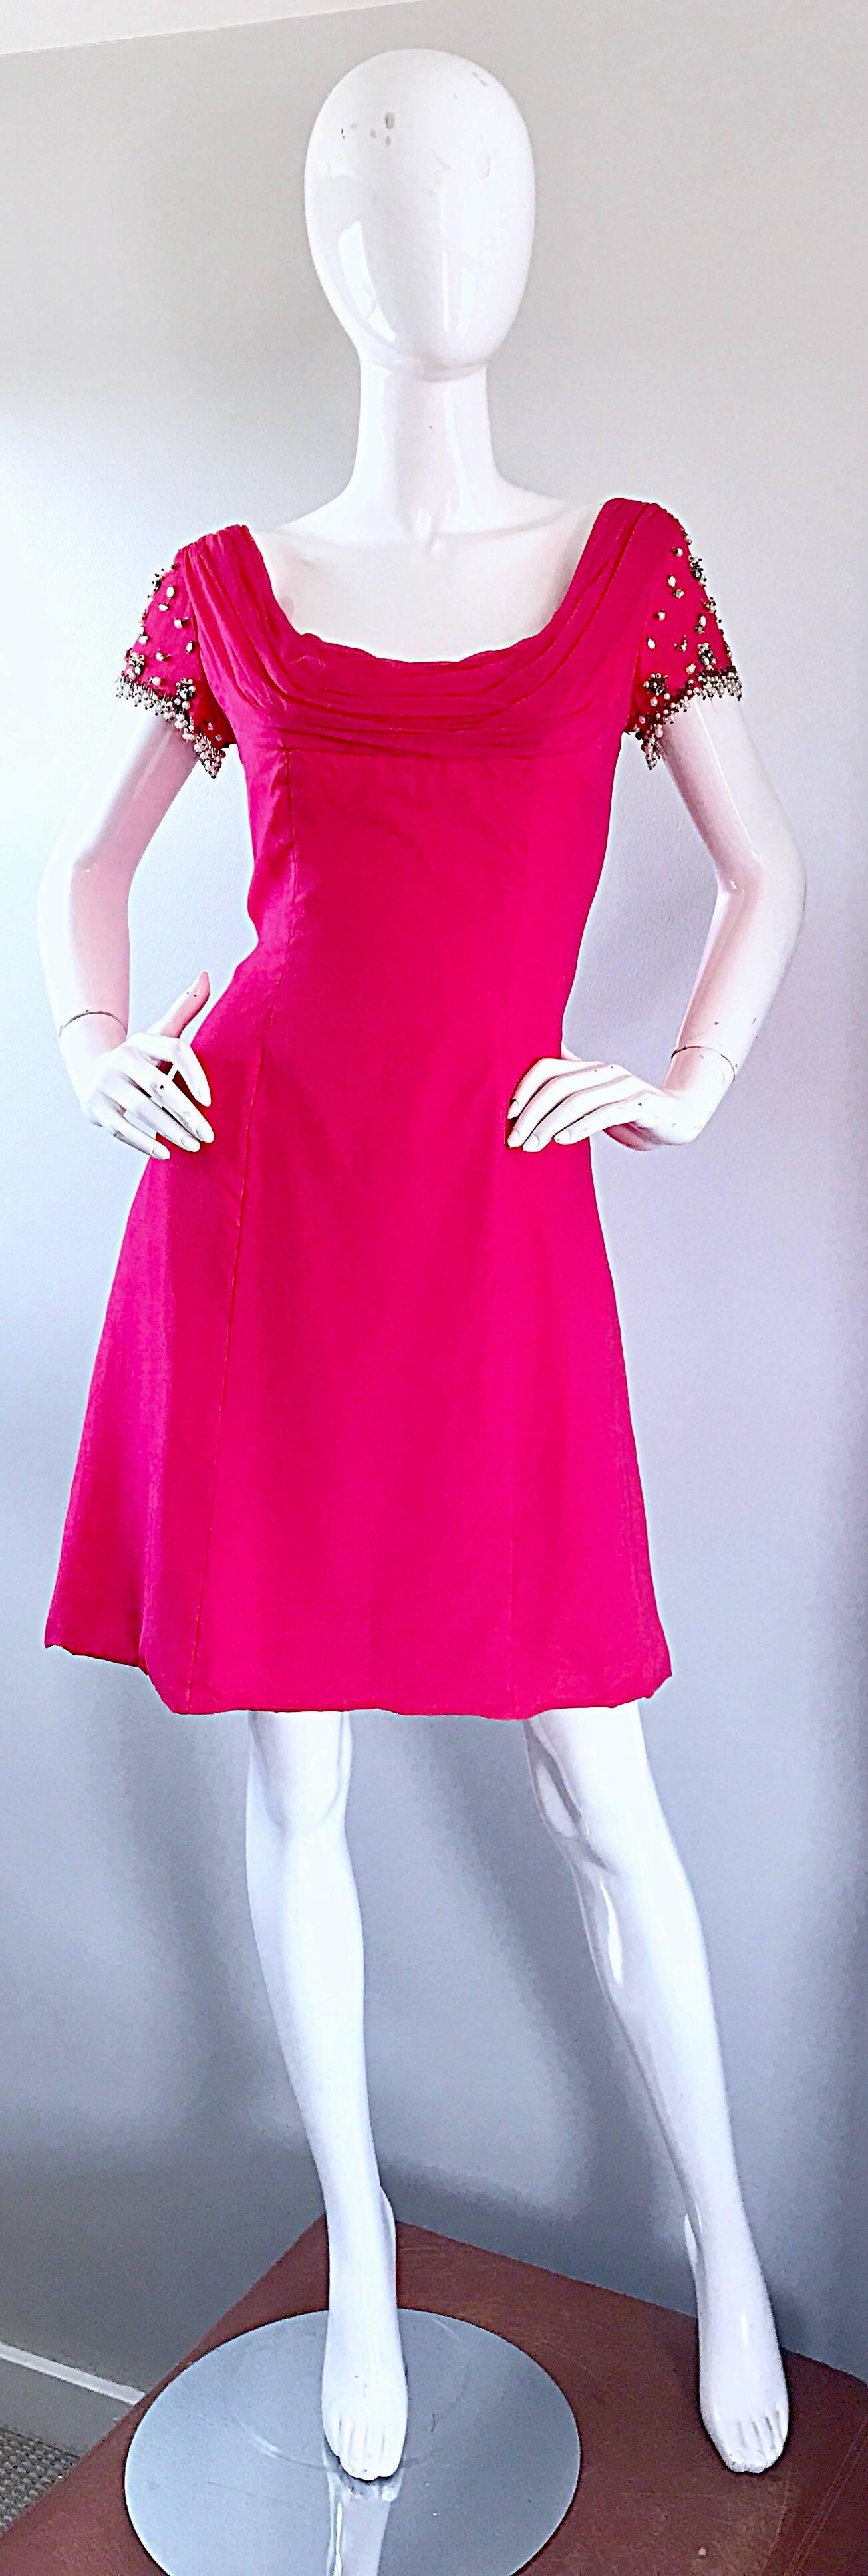 Beautiful early 1960s LILLI DIAMOND hot pink chiffon A-Line dress! Brand new with original store tags! Features hand-sewn beads, rhinestones and pearls on each sleeve. Full metal zipper up the back with hook-and-eye closure. Fitted bodice, with a